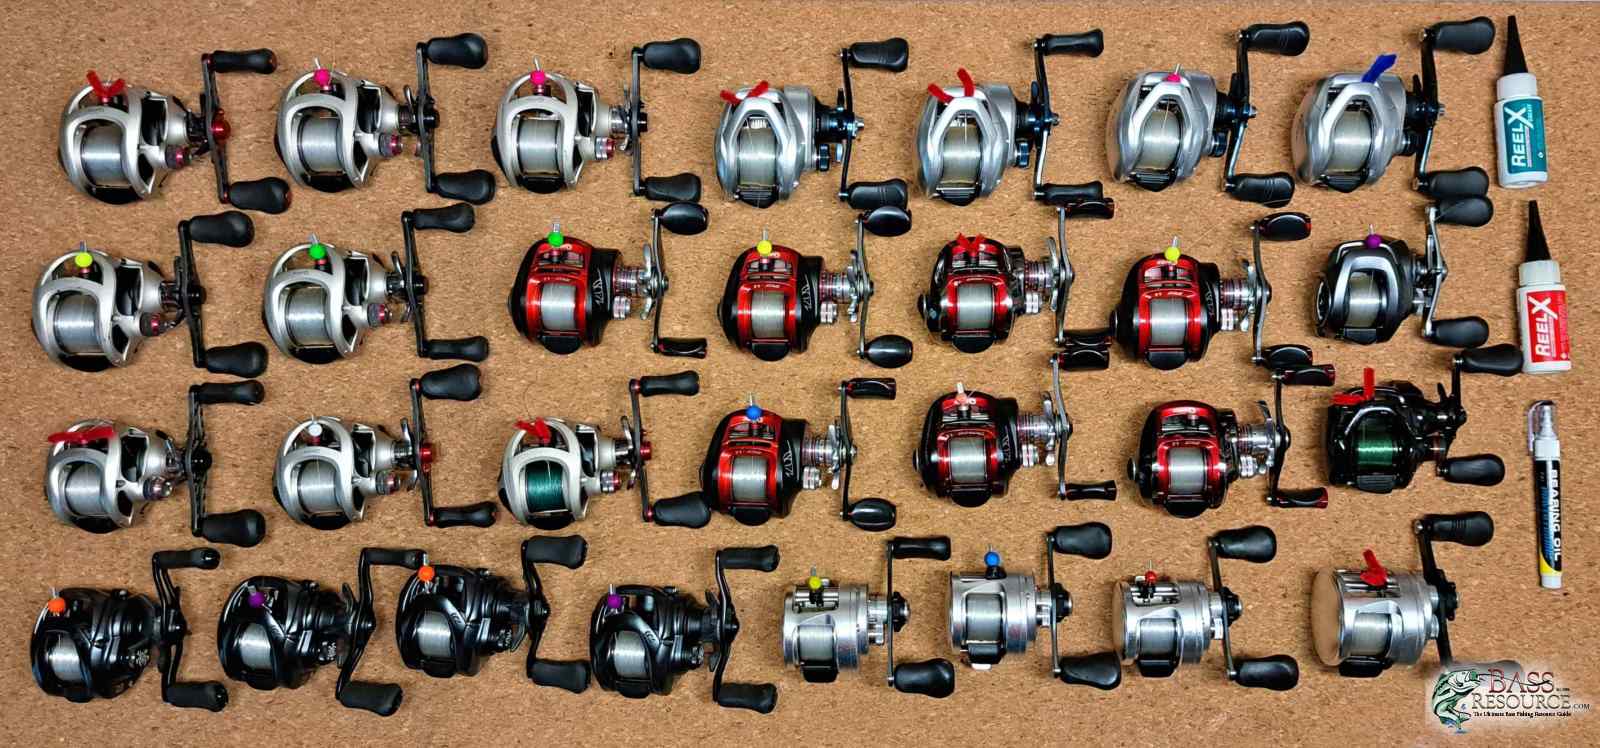 I May Never Clean My Reels Again - Fishing Rods, Reels, Line, and